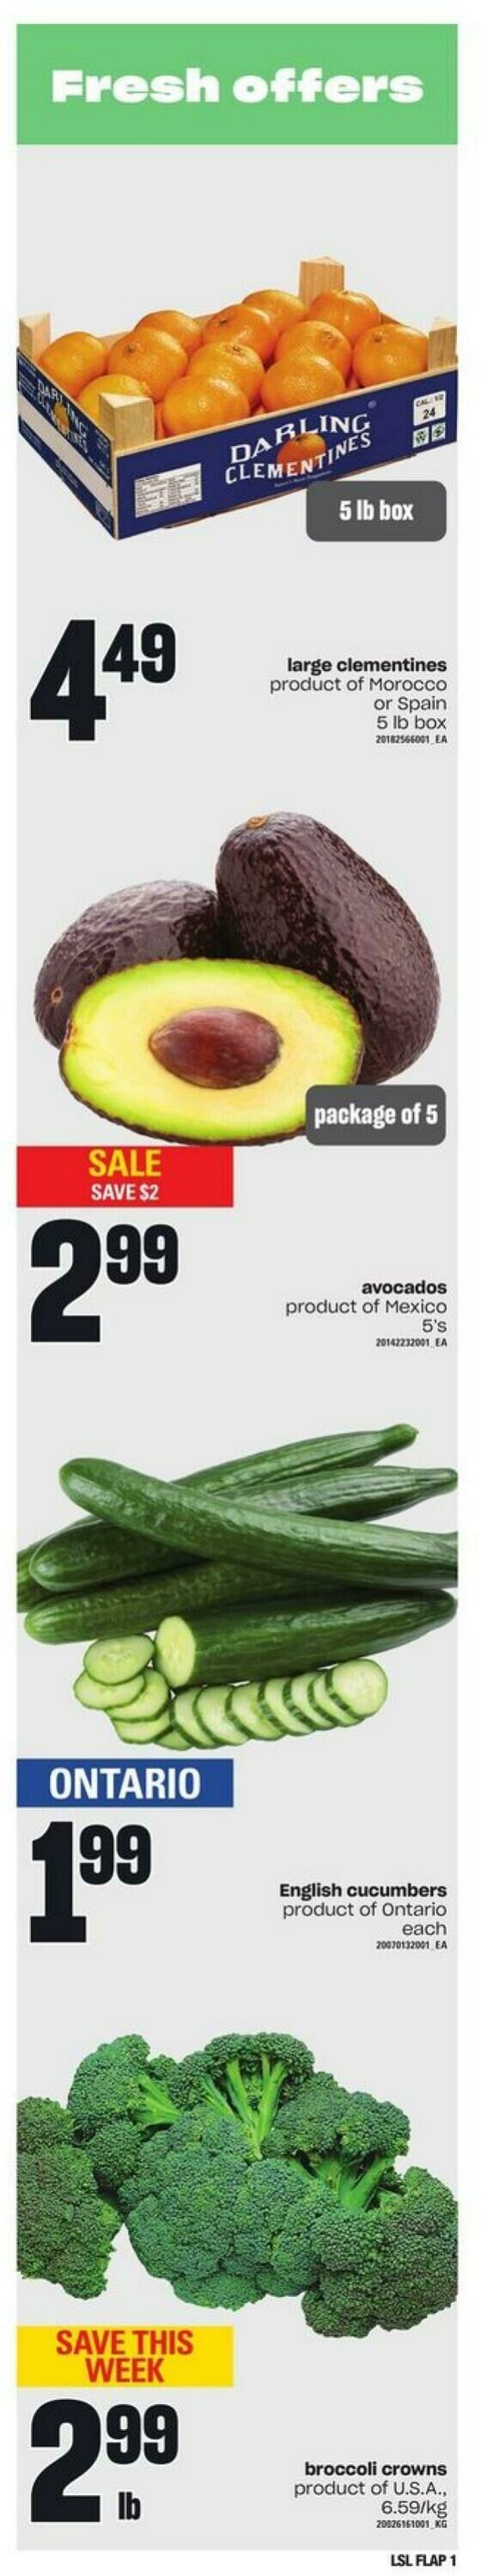 Loblaws Flyer from 11/30/2023